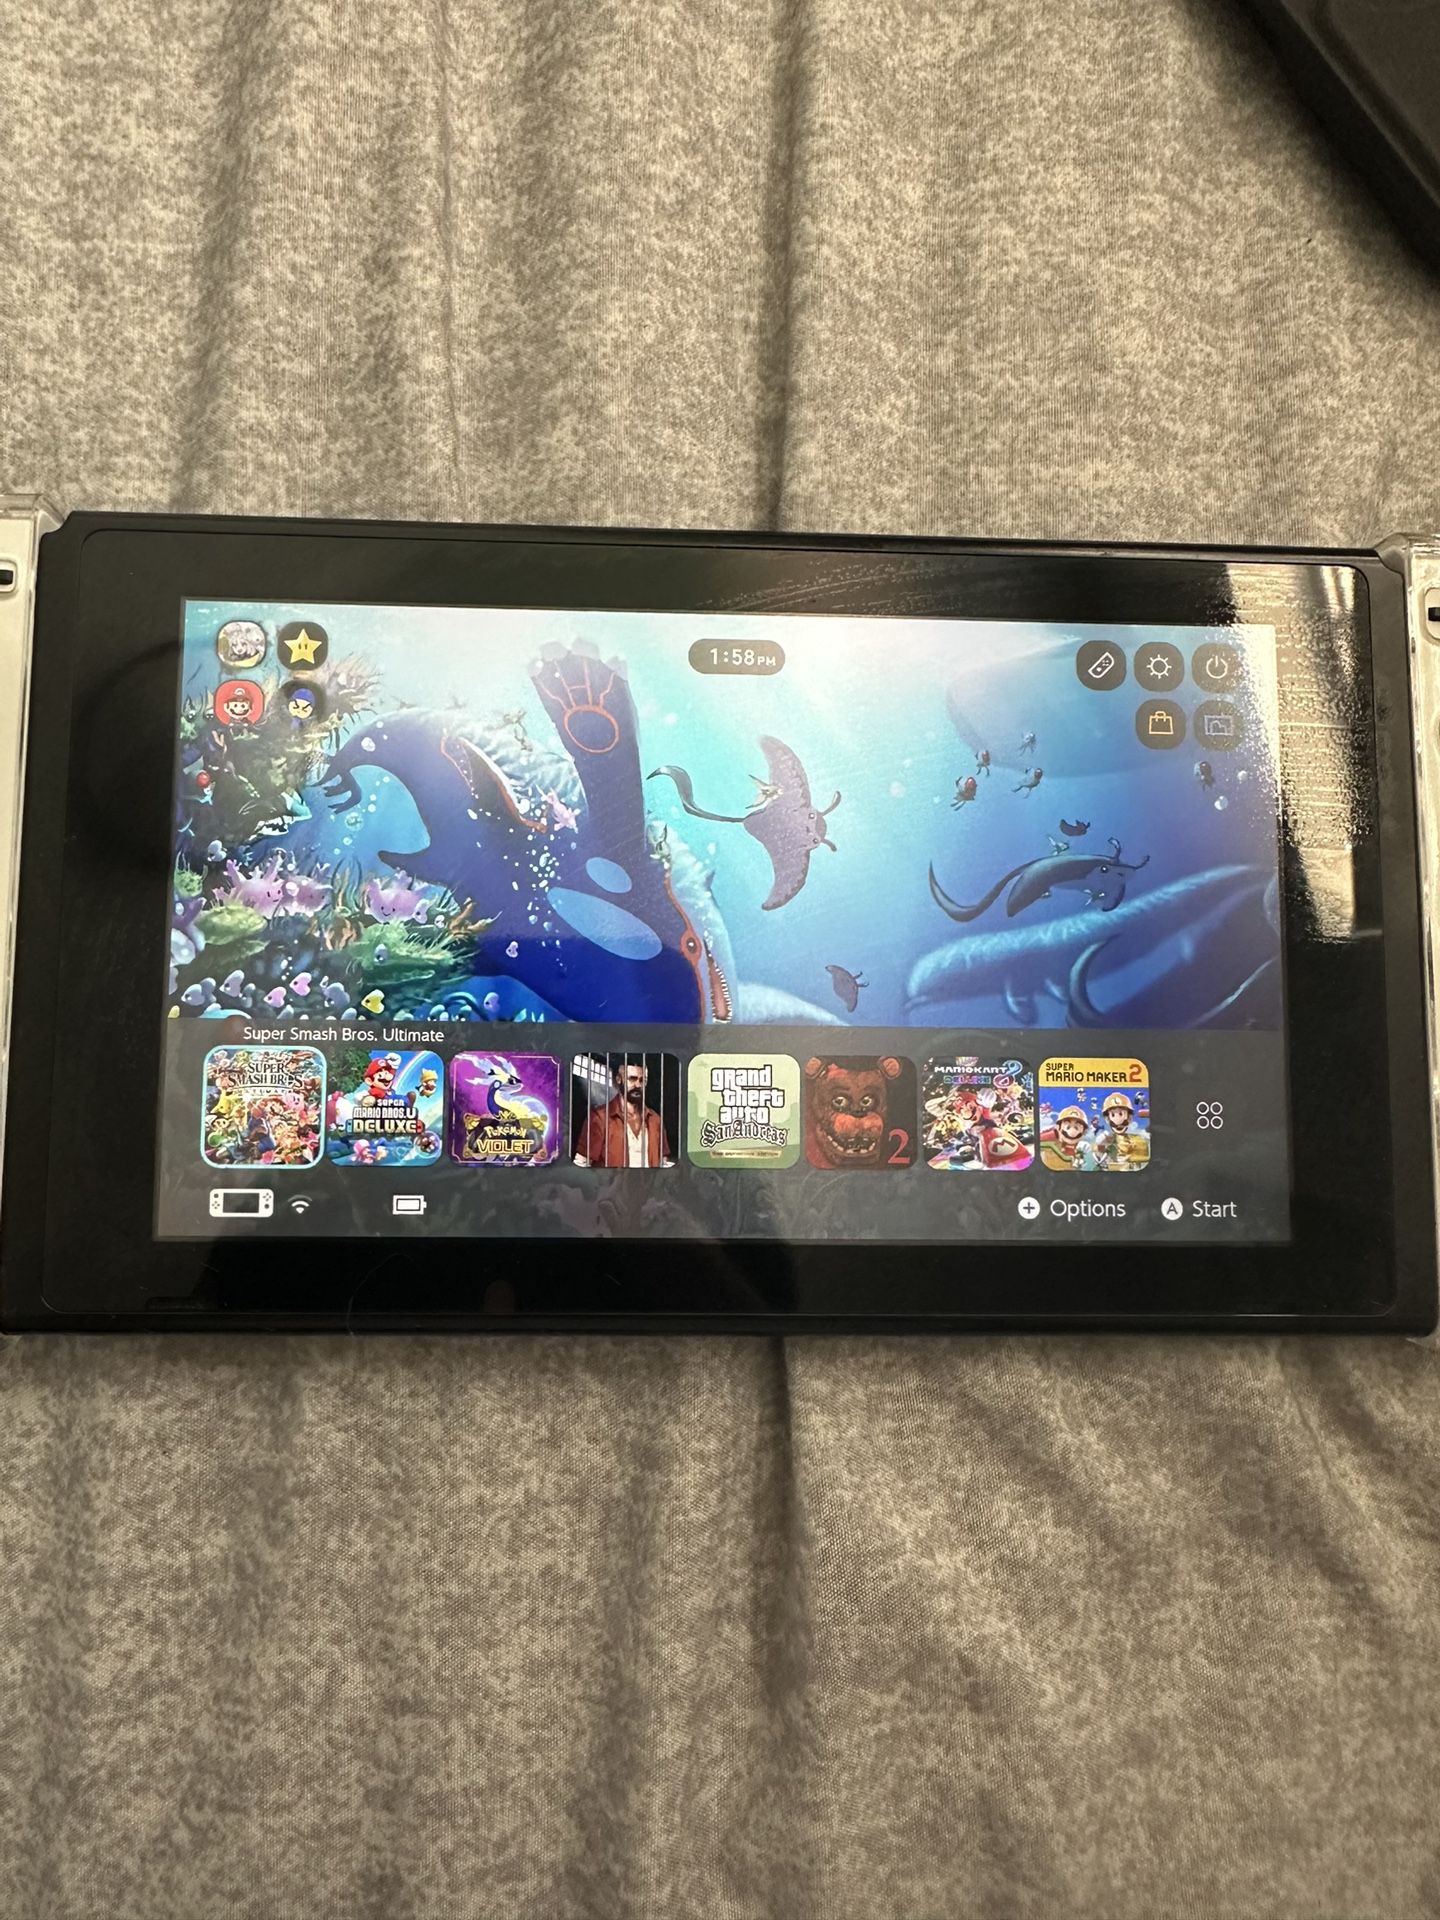 Modded/Hacked Nintendo Switch - FREE Games